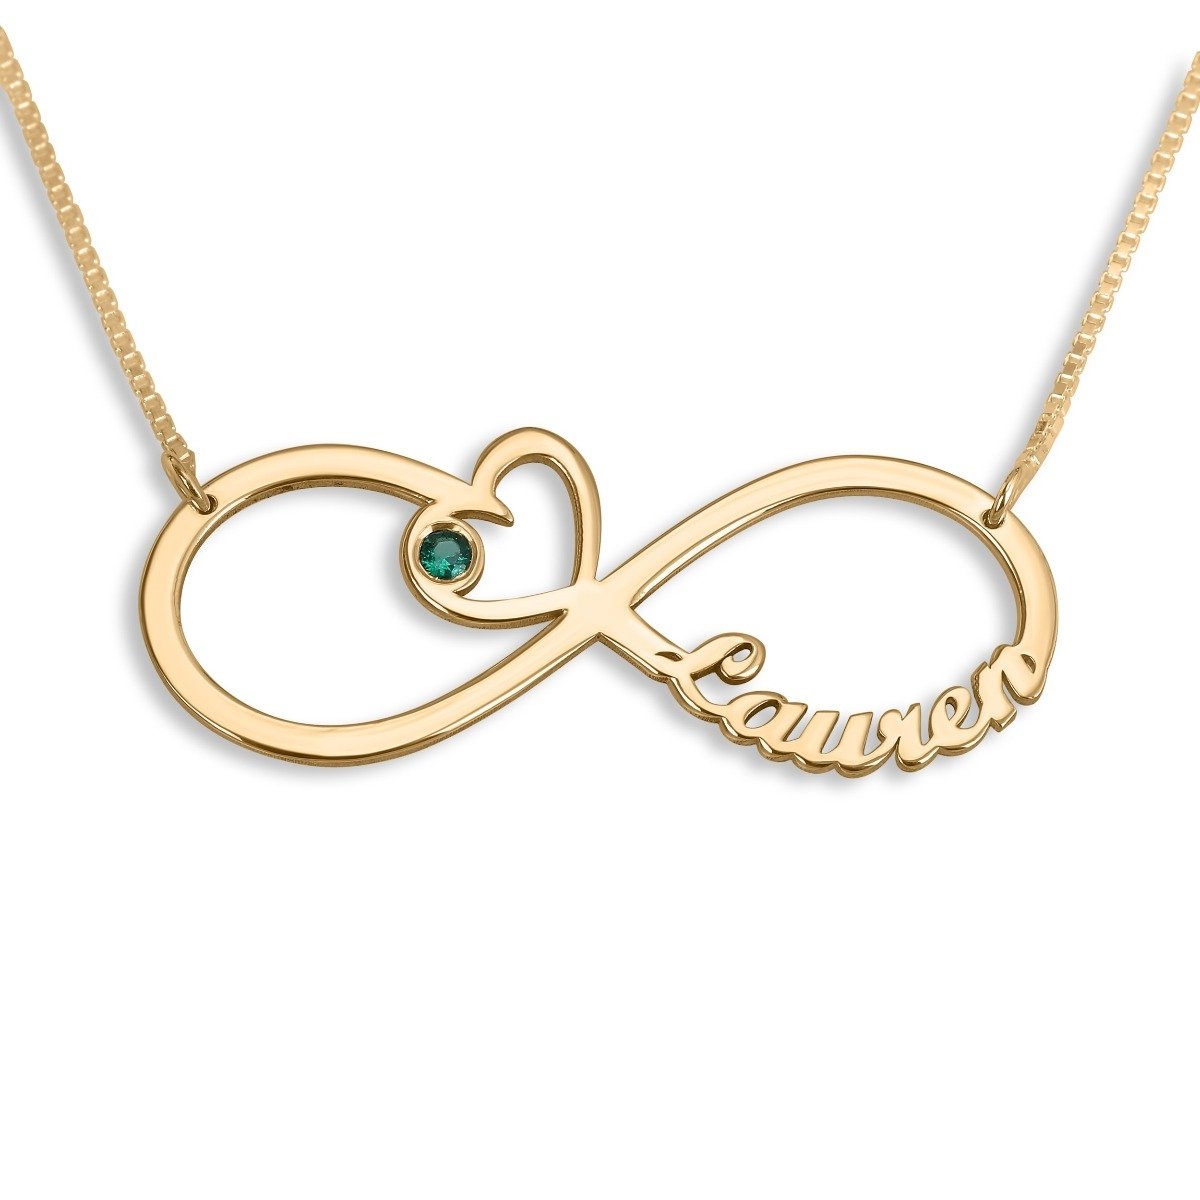 Gold-Plated English/Hebrew Infinity Heart Birthstone Personalized Name Necklace - 1